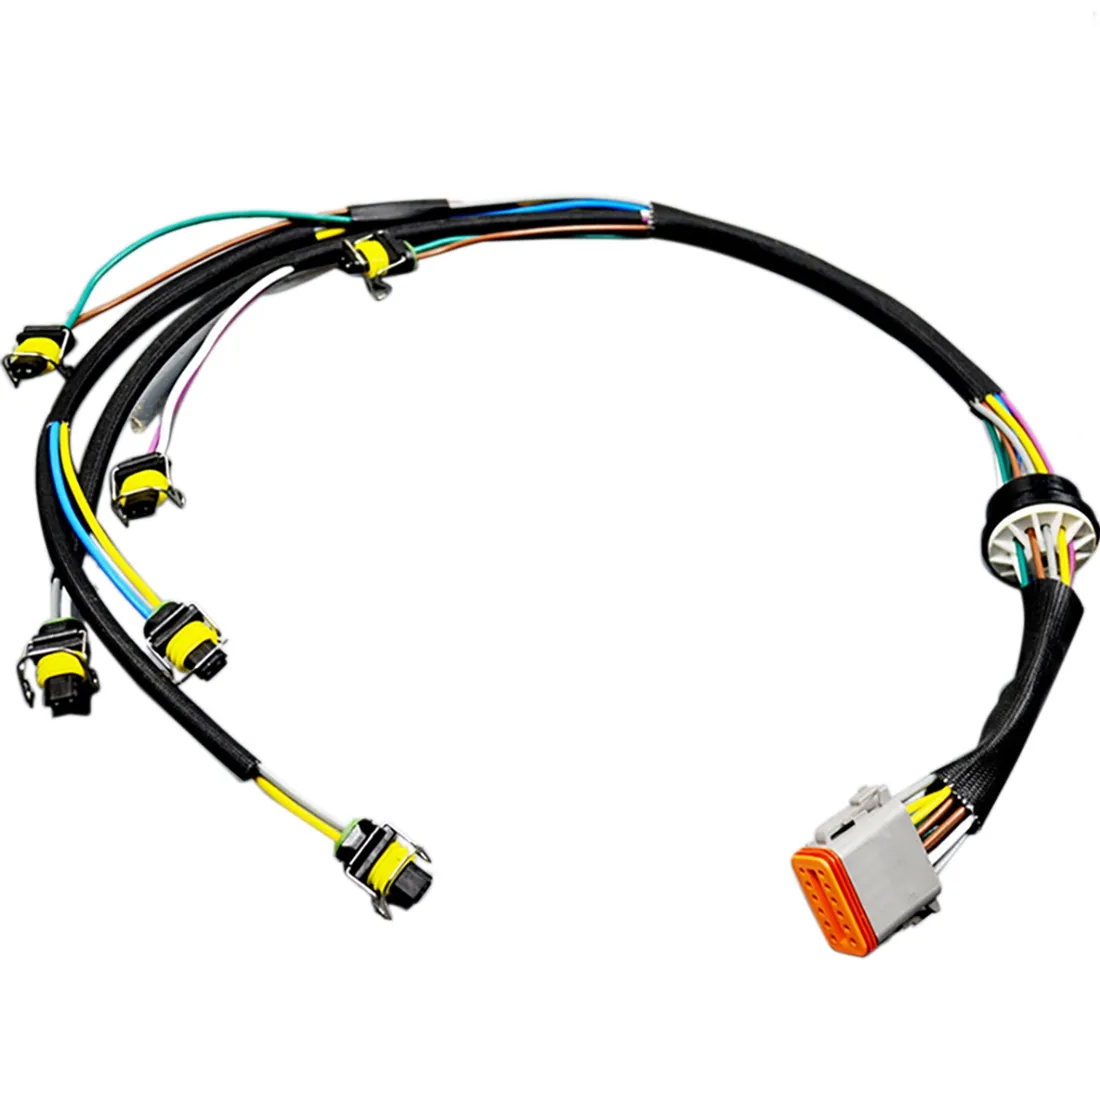 917 fuel injector wiring harness fit for caterpillar c7 324d 325d 329d engine excavator thumb200